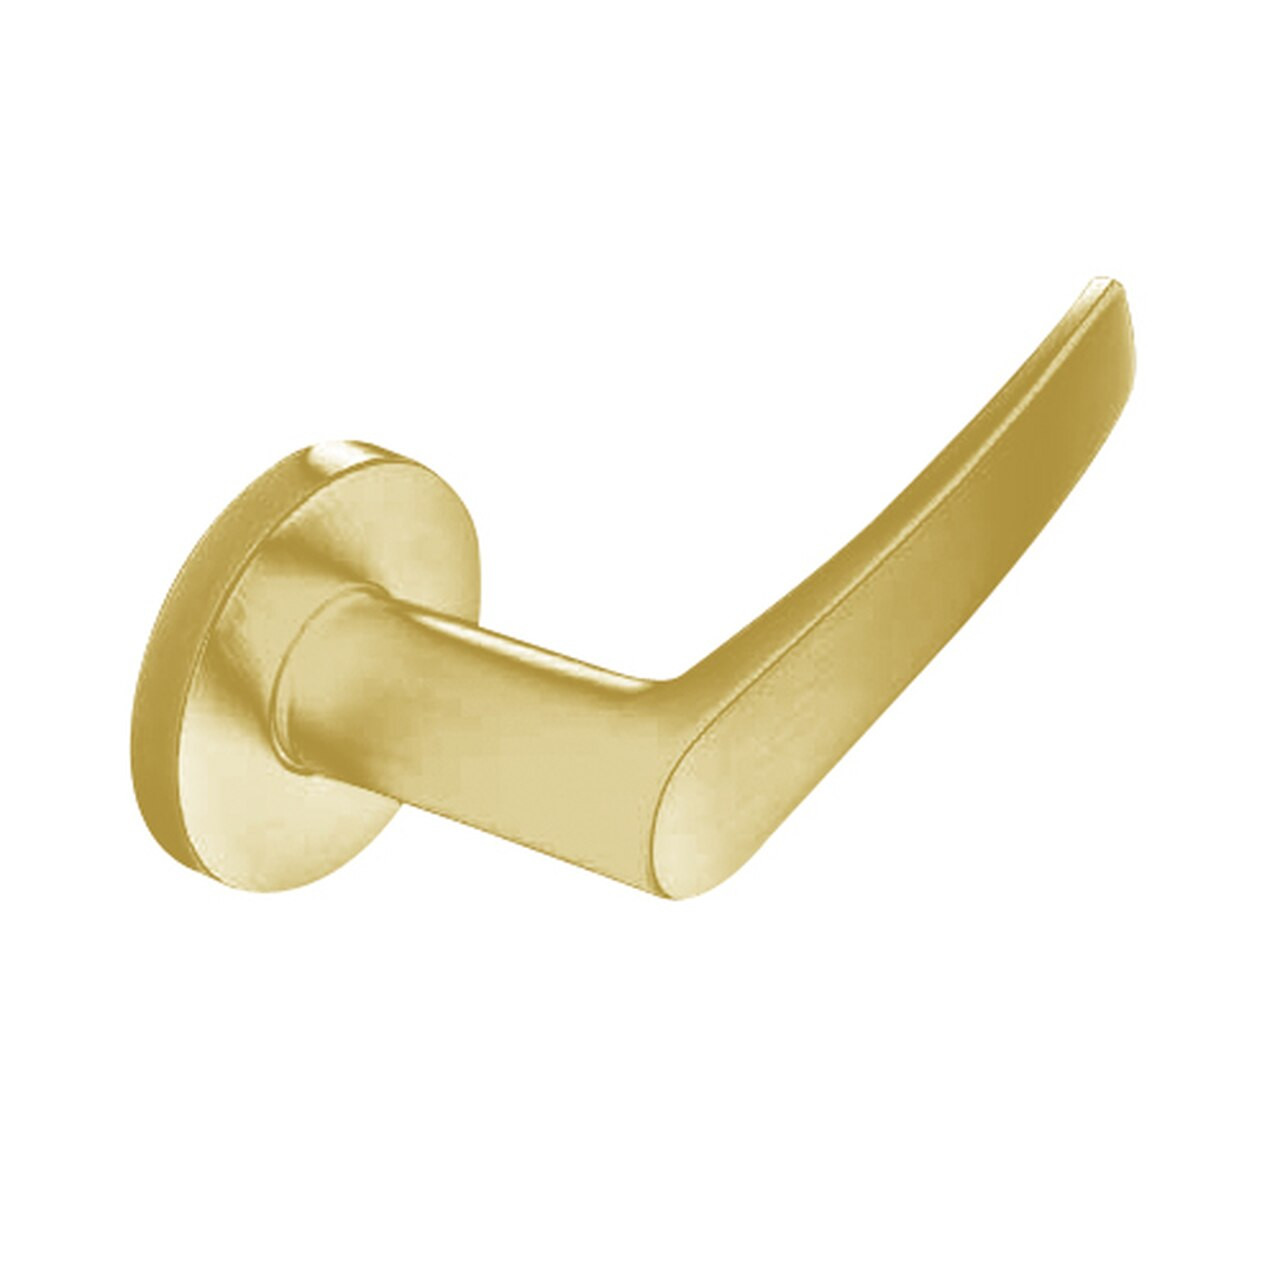 ML2058-ASA-605-LC Corbin Russwin ML2000 Series Mortise Entrance Holdback Locksets with Armstrong Lever in Bright Brass